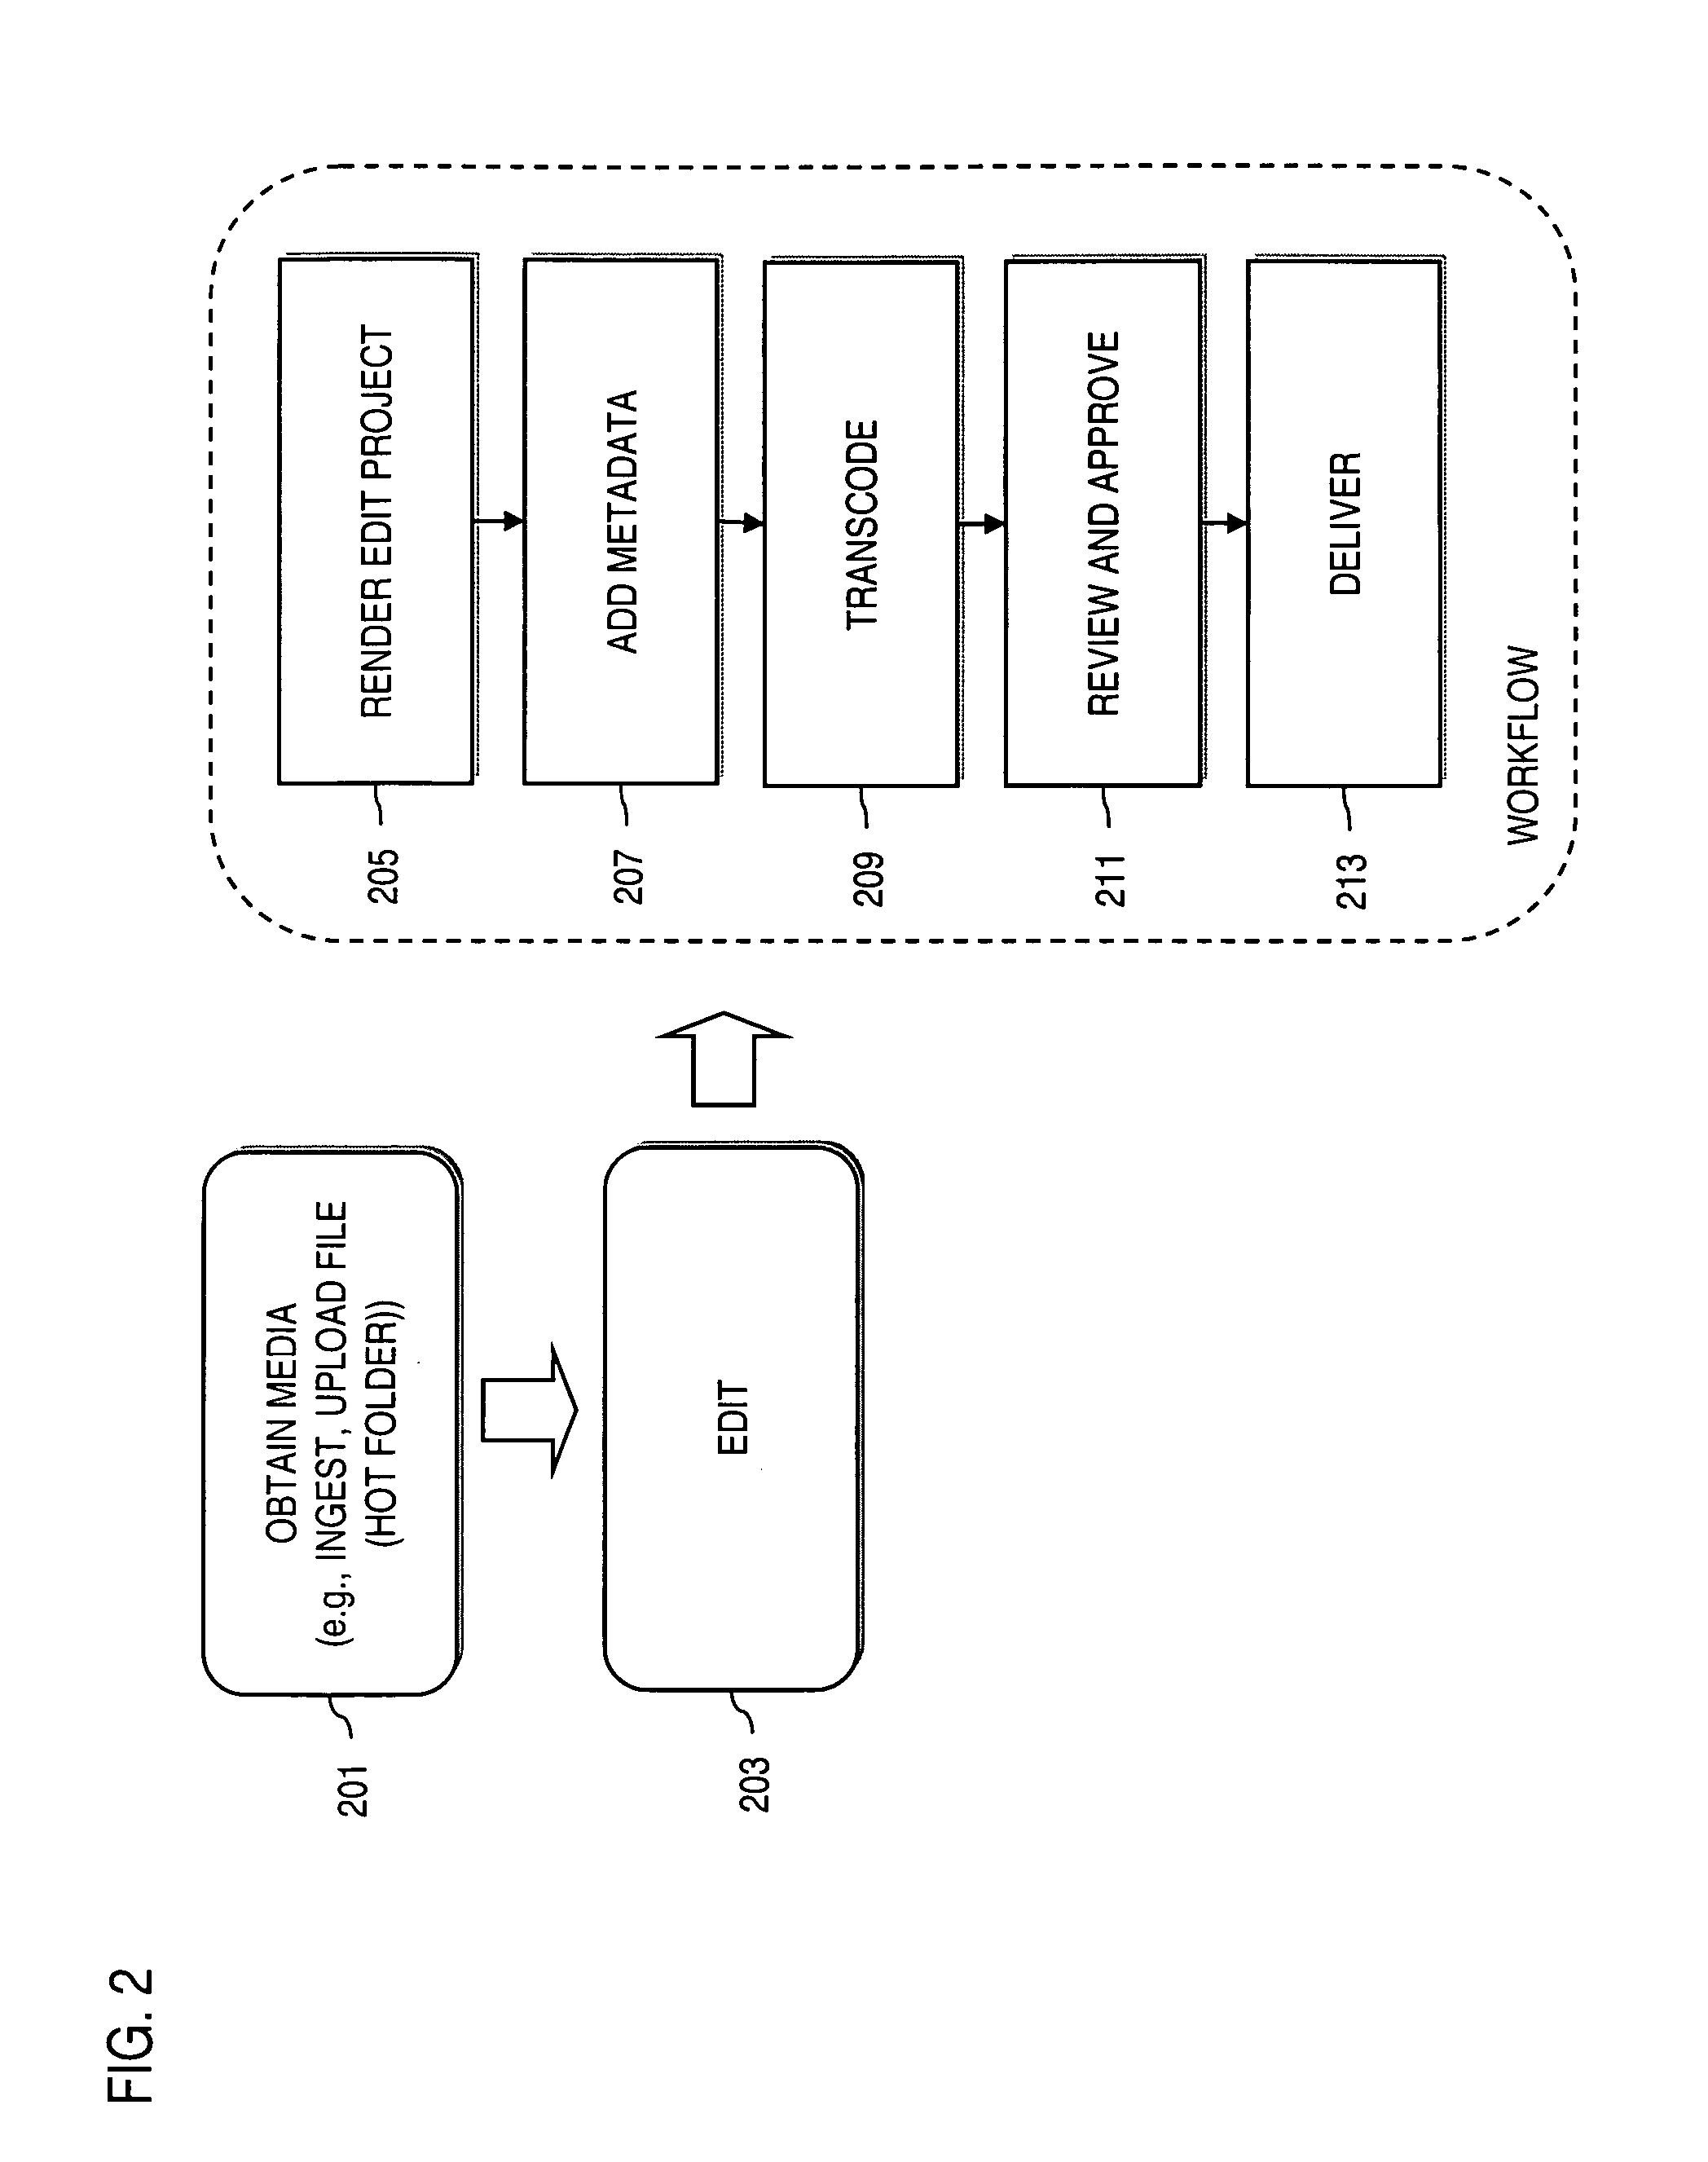 Method and system for providing distributed editing and storage of digital media over a network